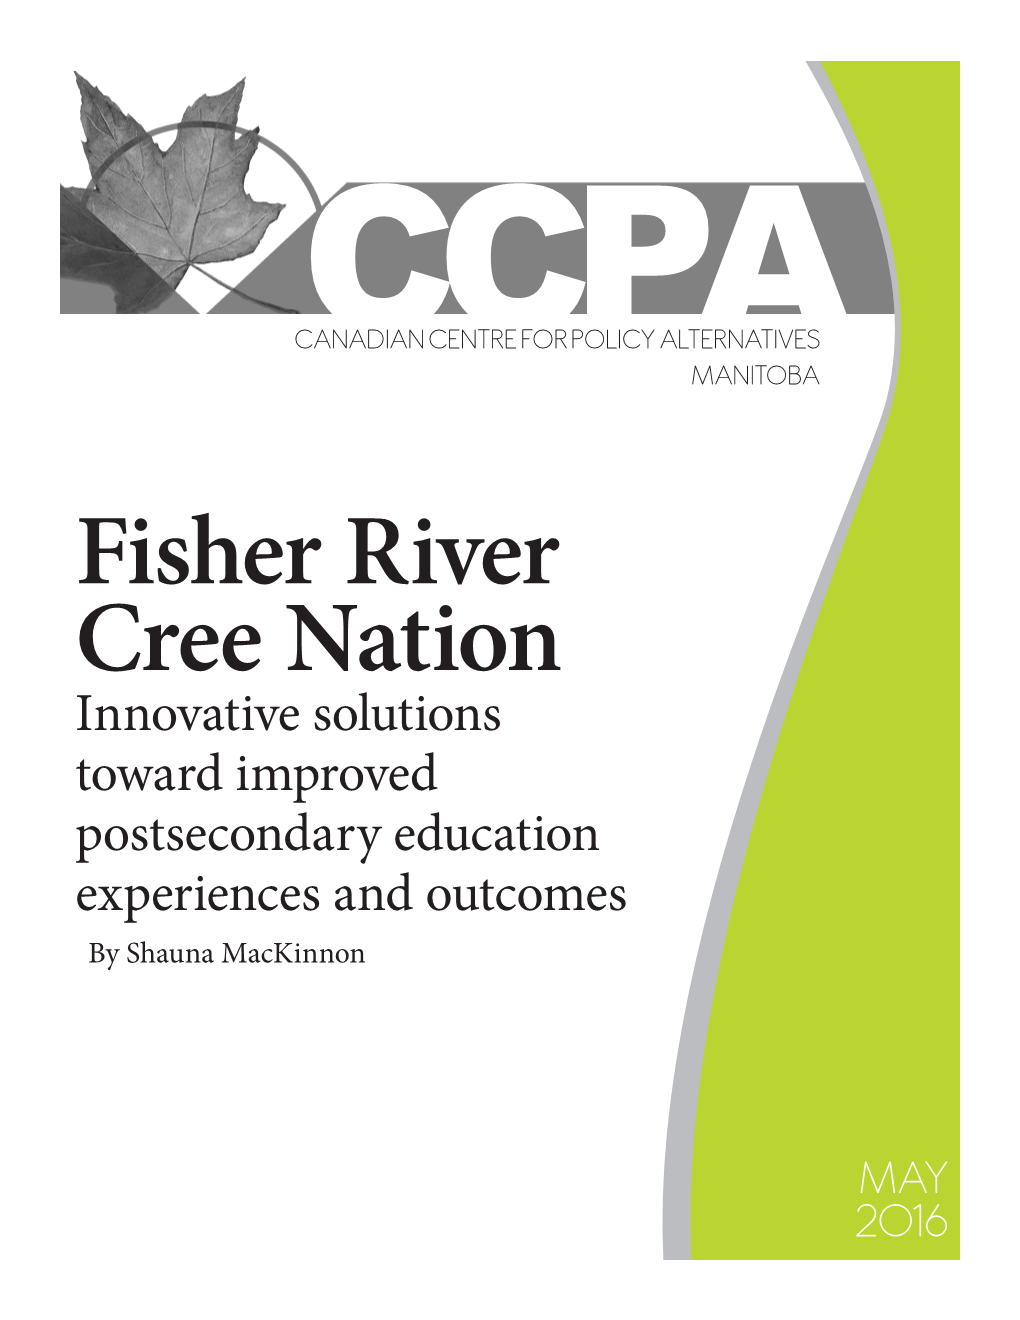 Fisher River Cree Nation Innovative Solutions Toward Improved Postsecondary Education Experiences and Outcomes by Shauna Mackinnon